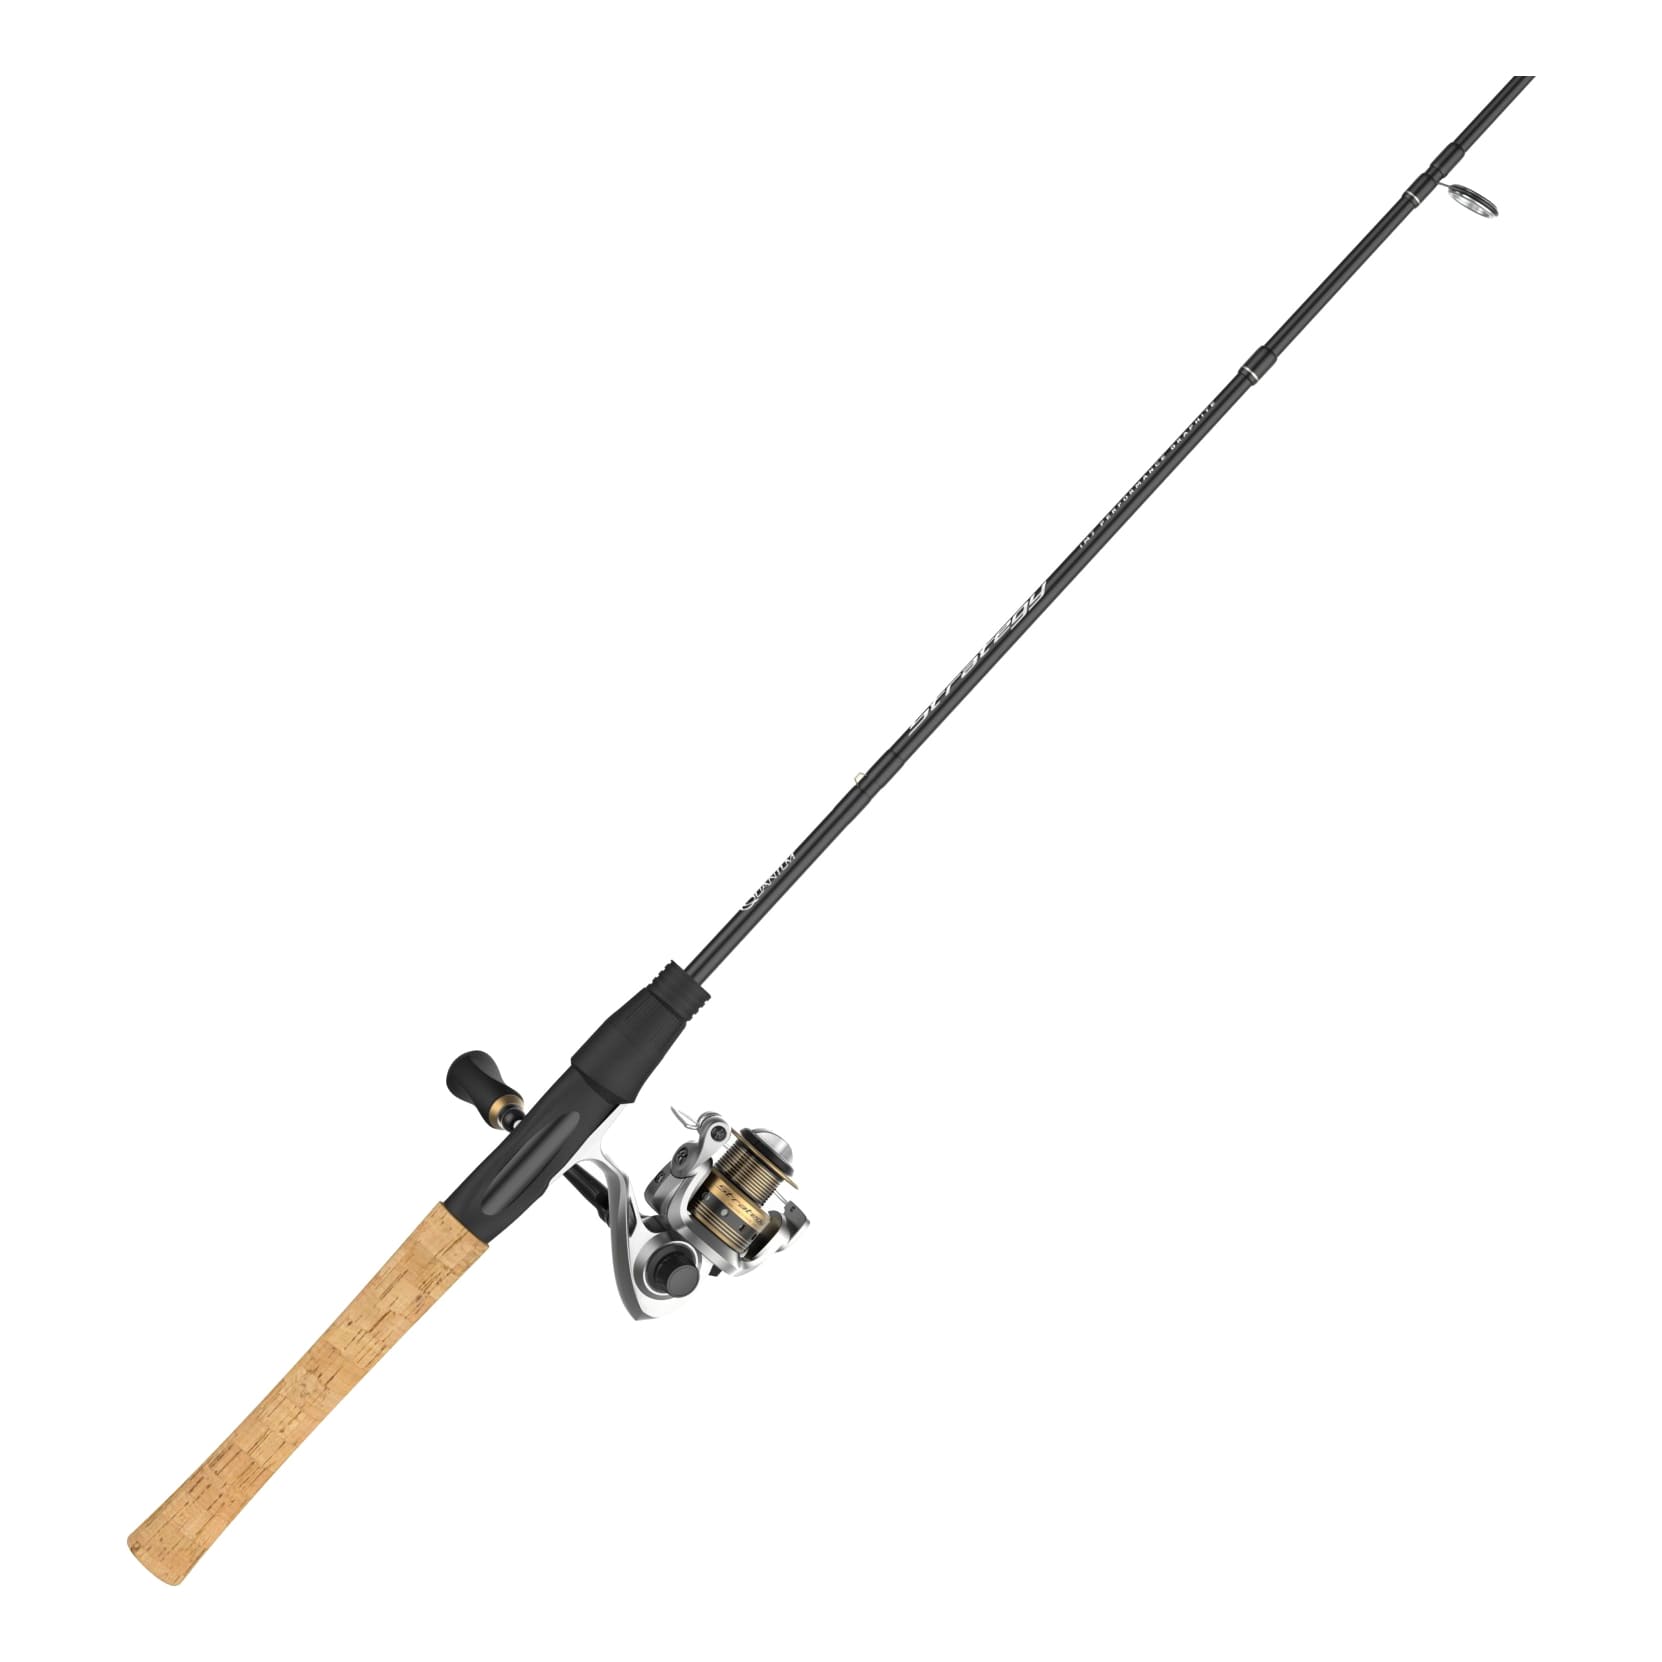 QUANTUM STRATEGY 30SZ 662M SPINNING COMBO